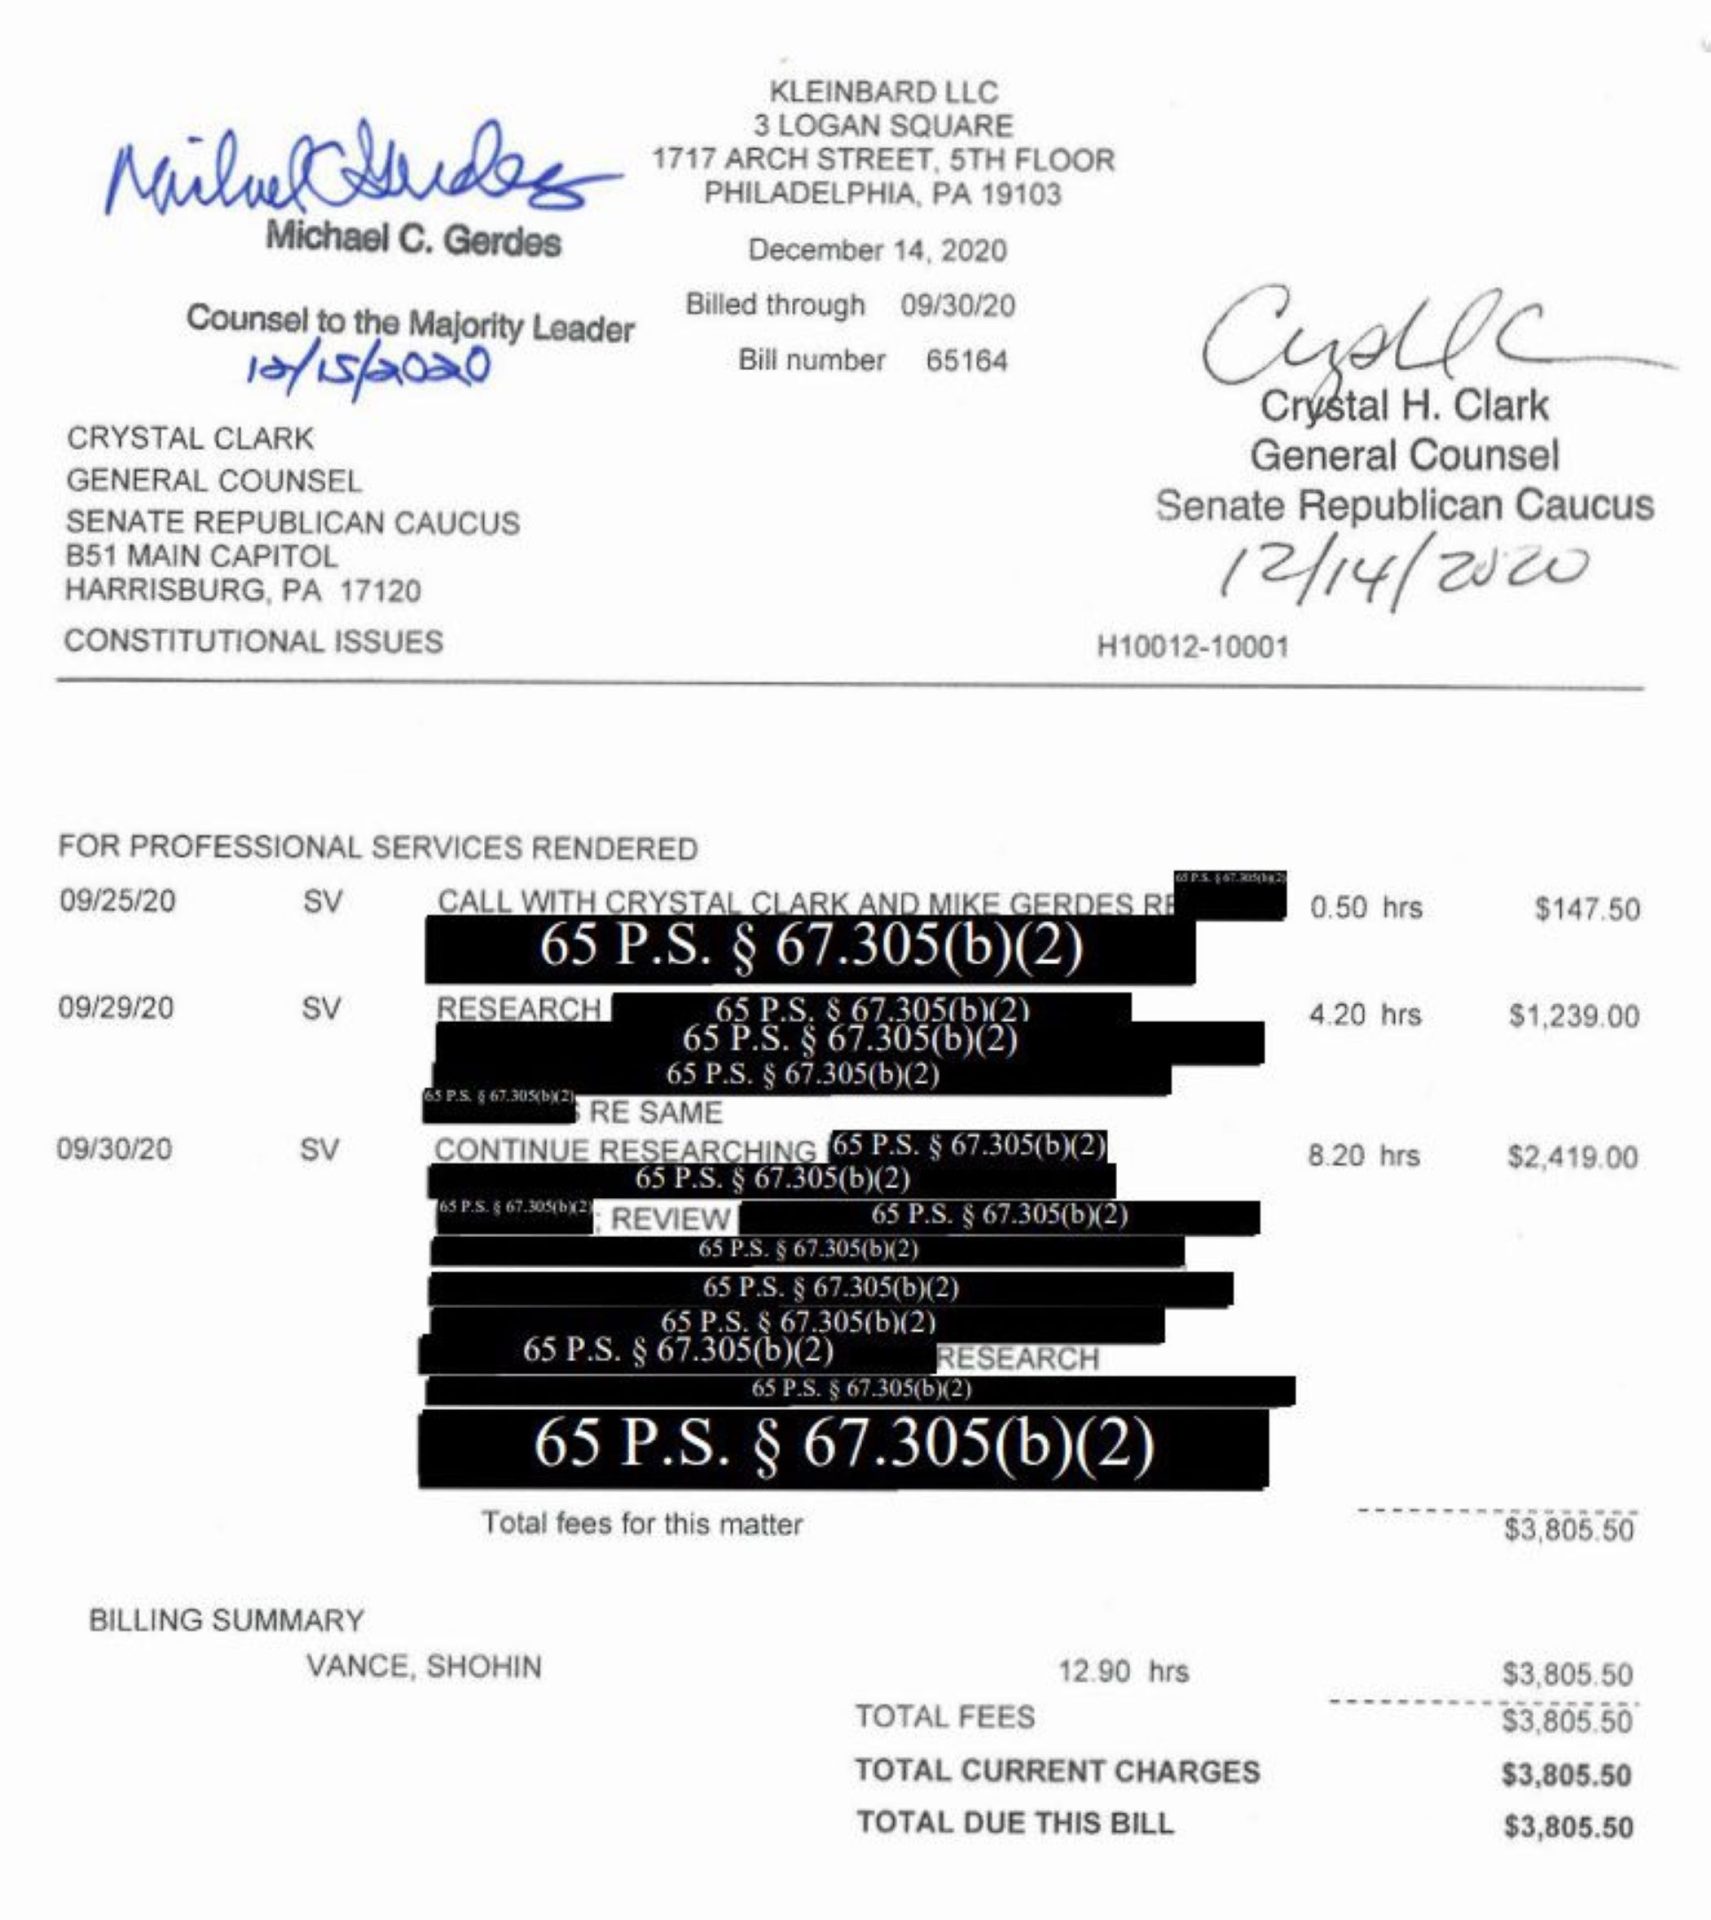 Despite a state Supreme Court ruling, the Pennsylvania legislature routinely redacts details on legal invoices and other documents. In this example, lawyers for Senate Republicans blacked out much of the information on a bill from the law firm Kleinbard.